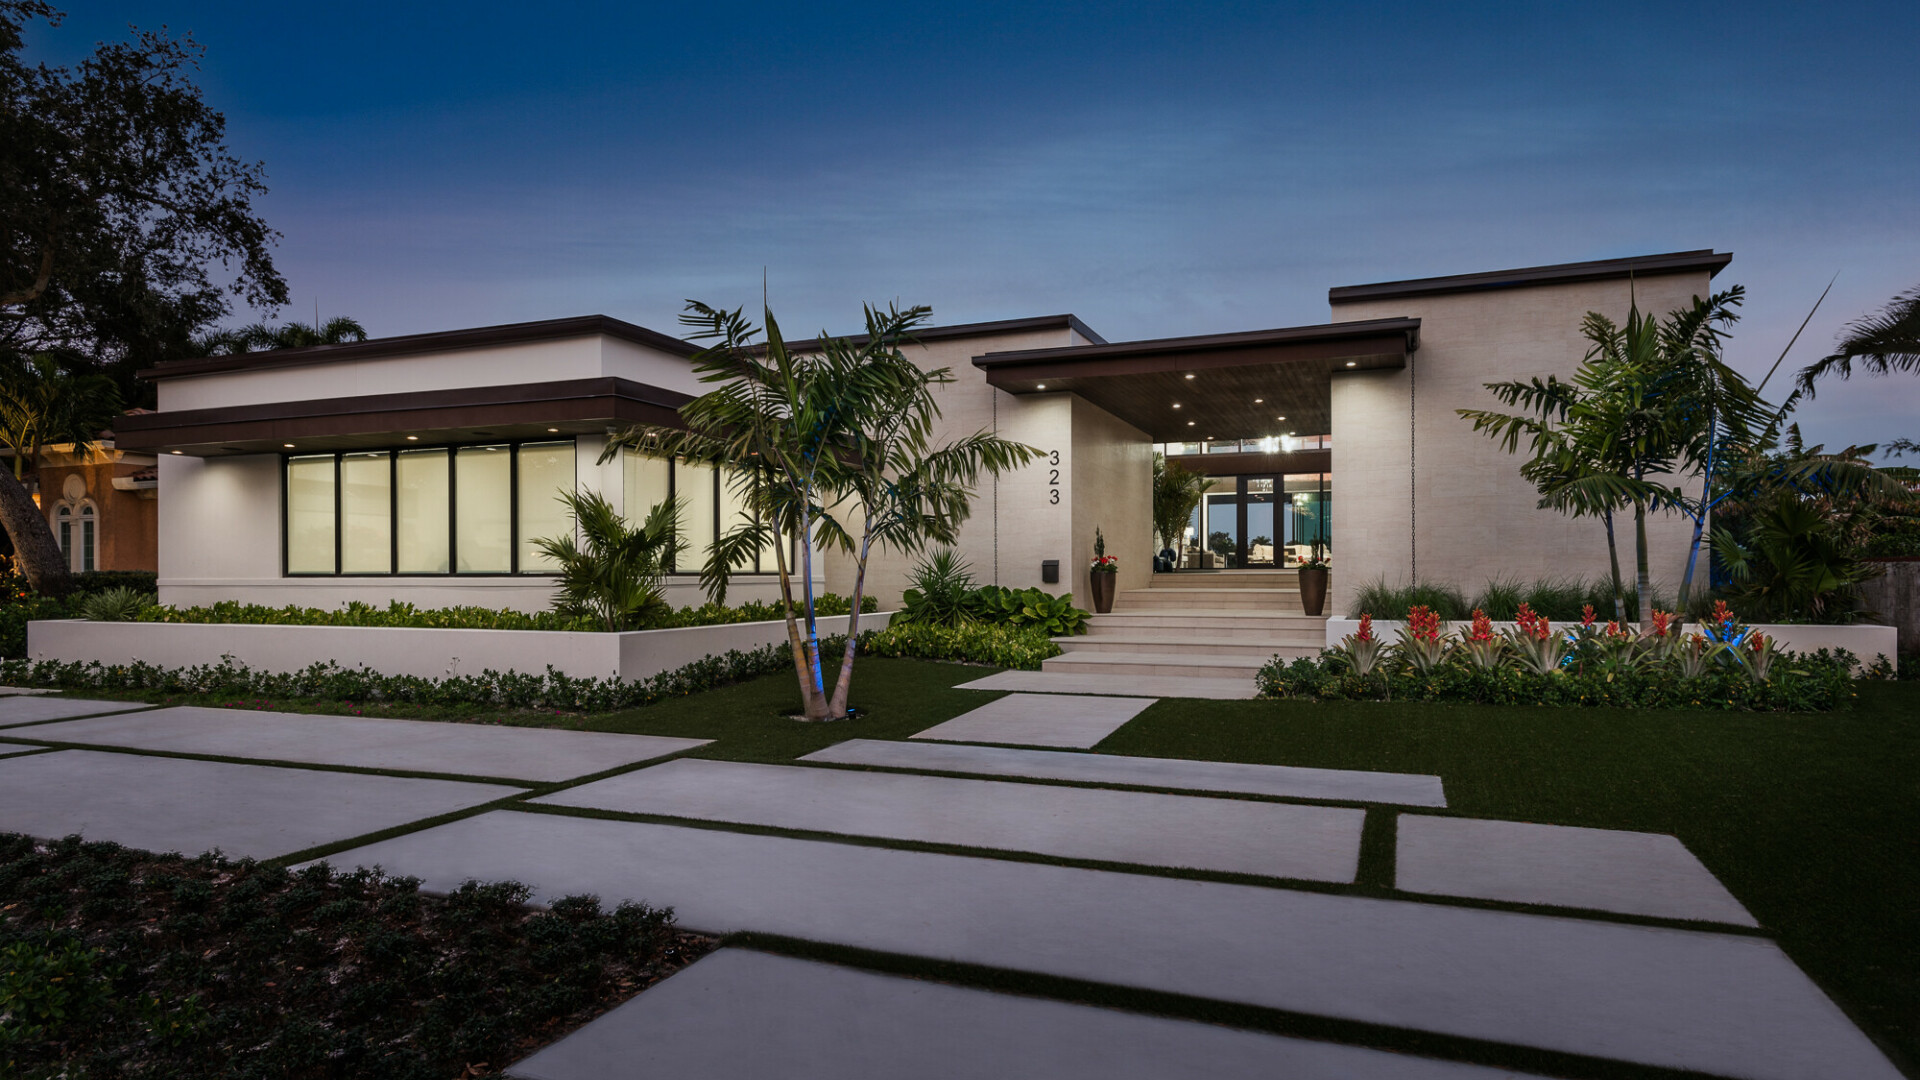 Front view of modern luxury home with a detailed walkway, Tampa FL